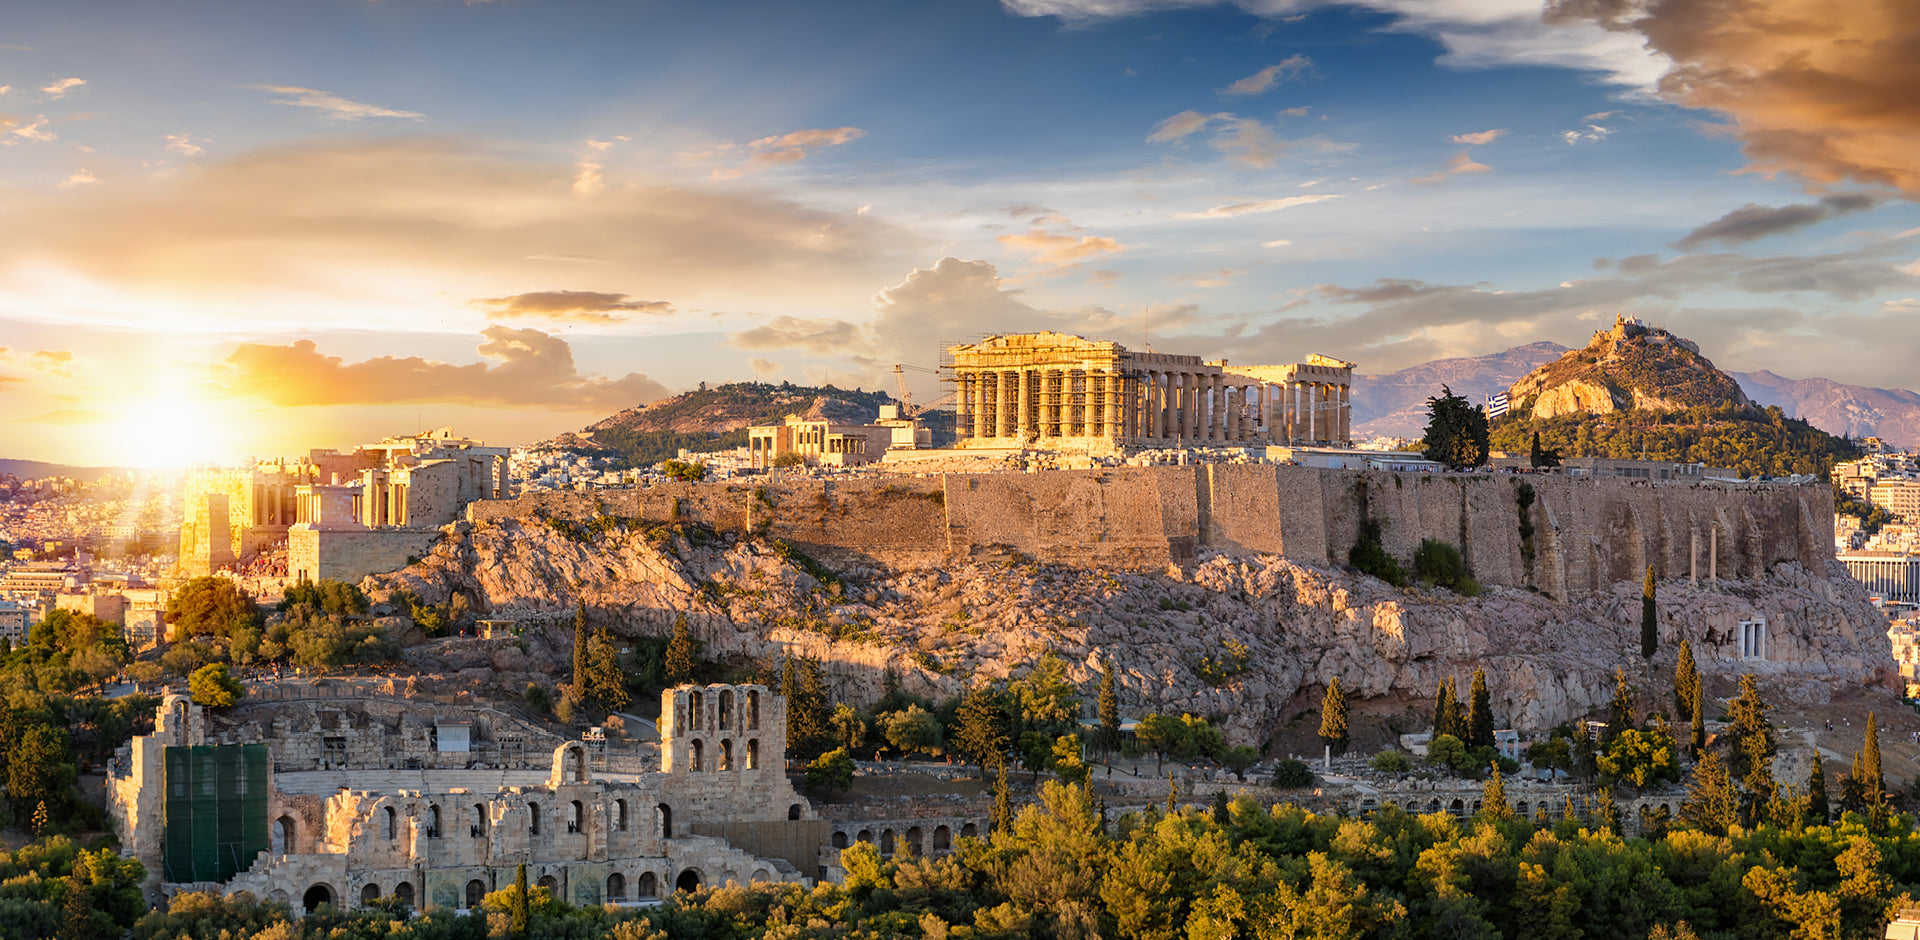 HISTORY OF THE PARTHENON